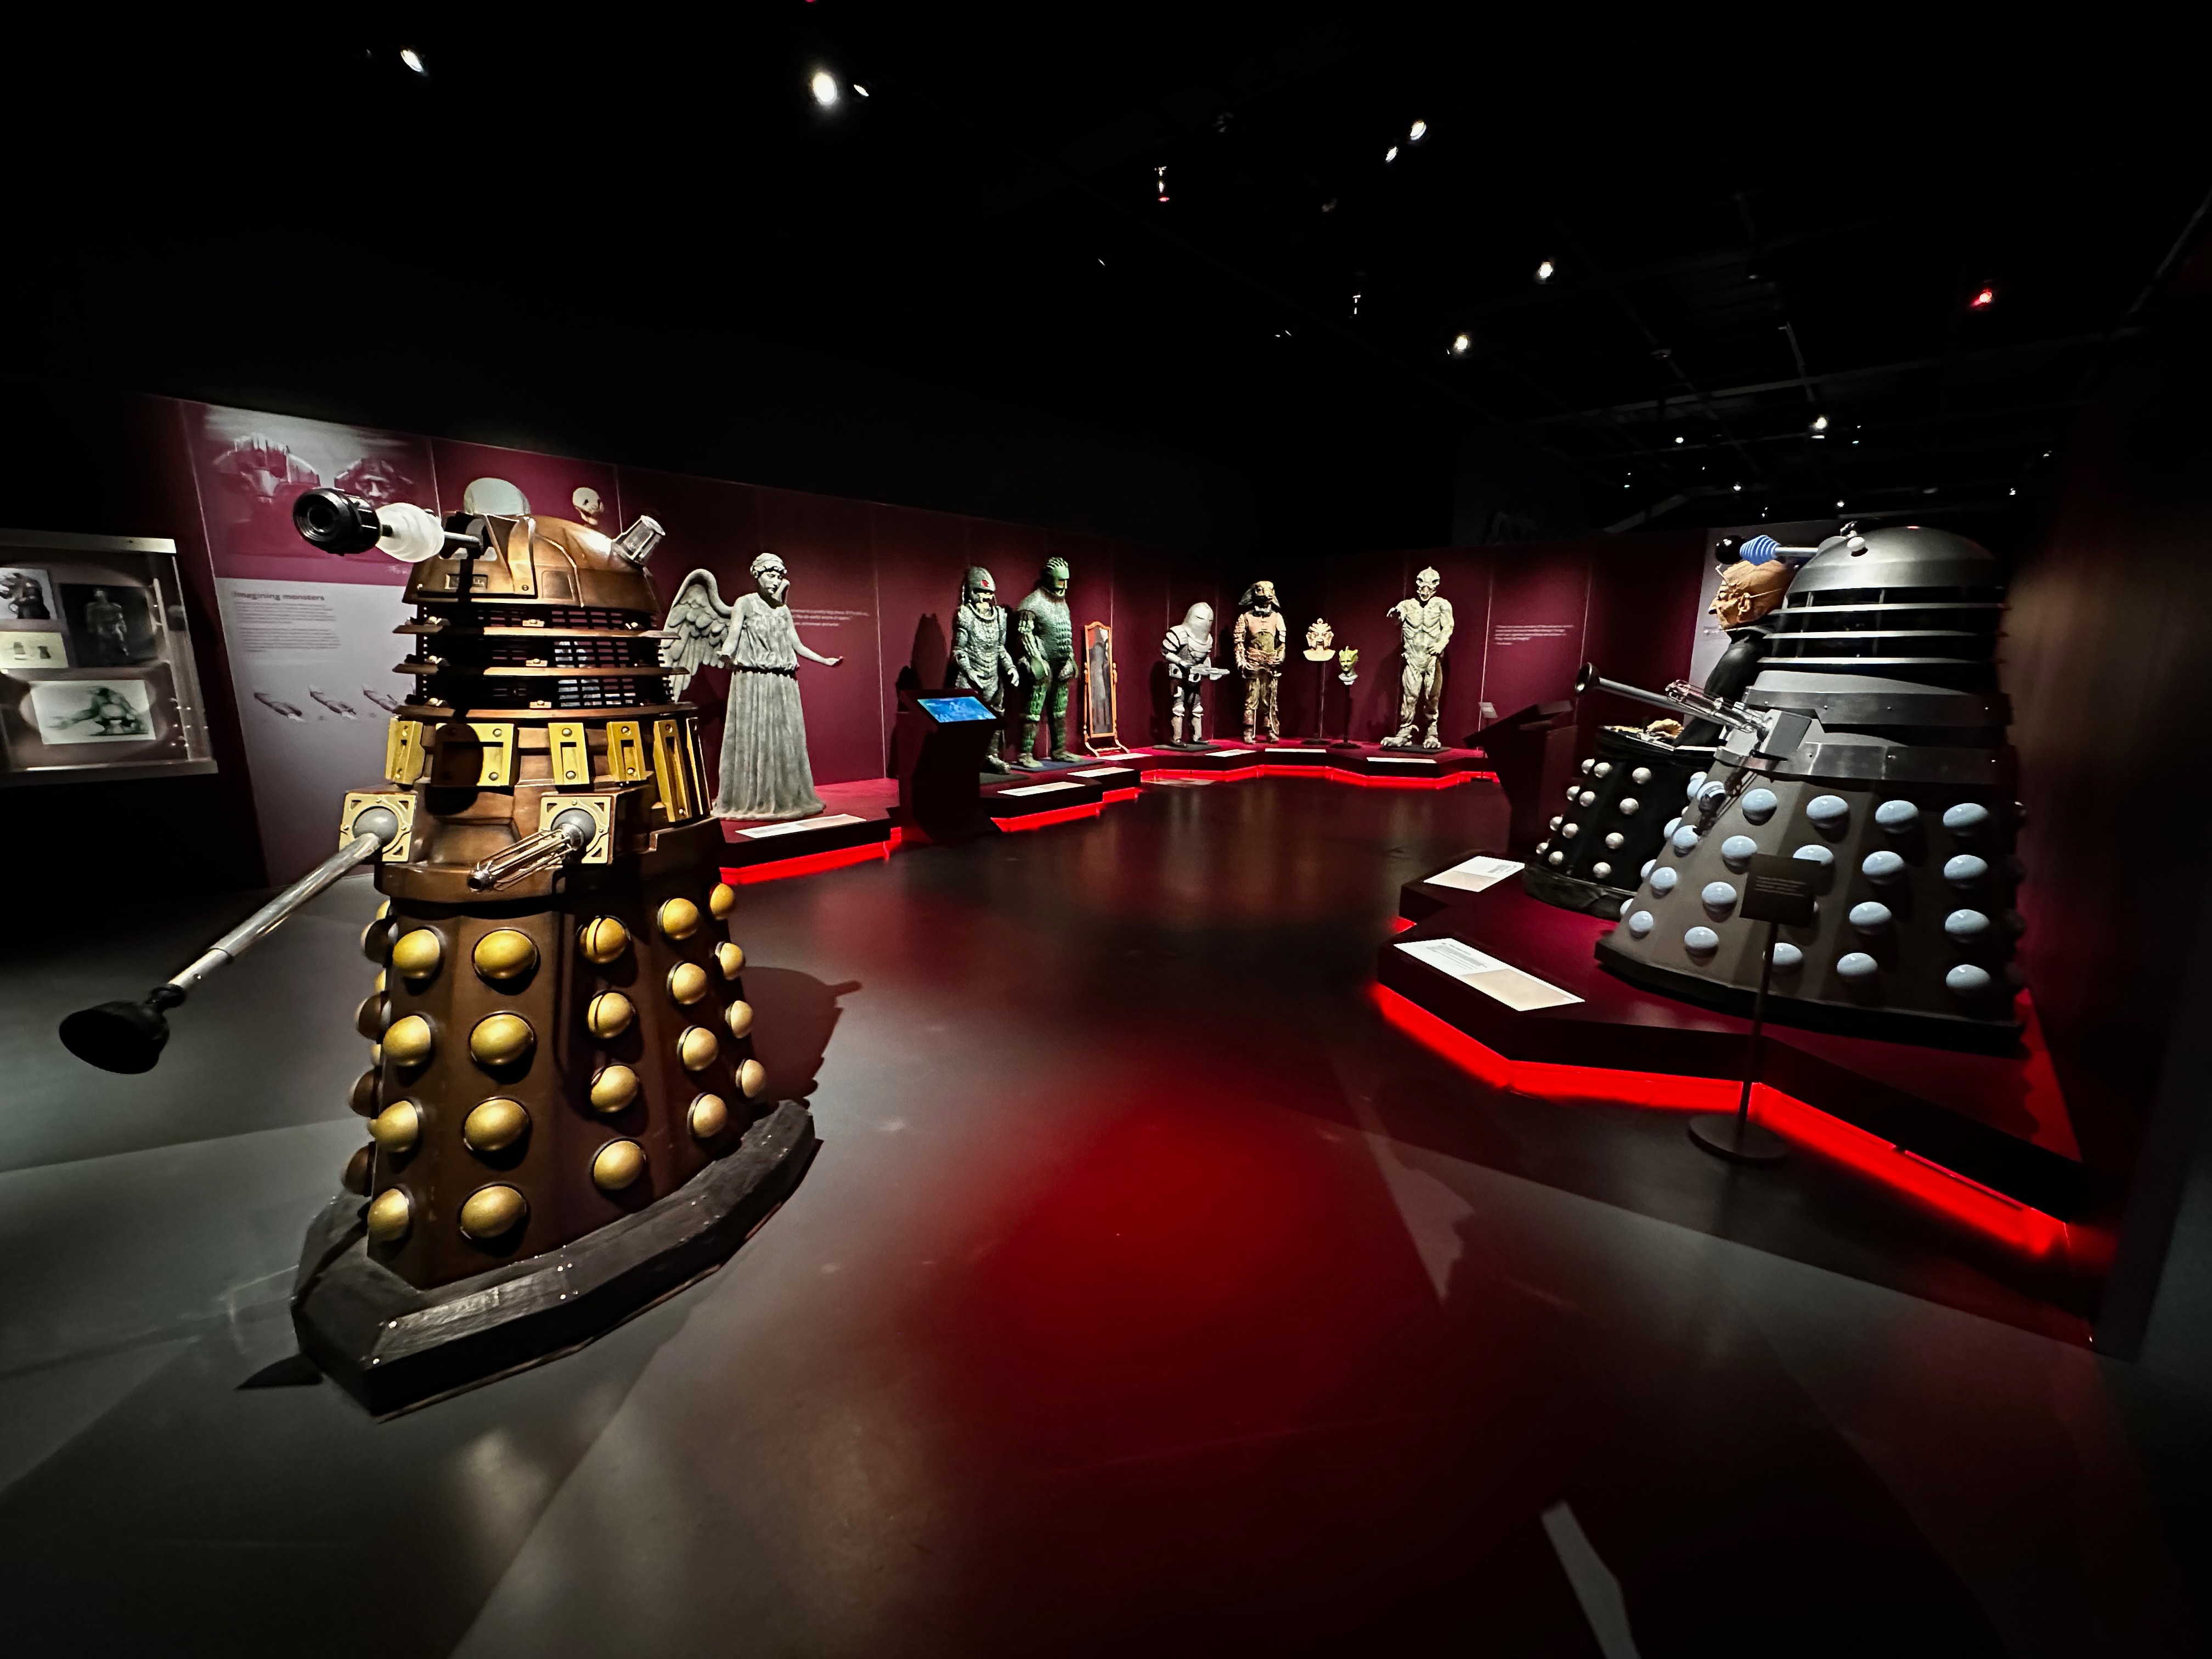 Daleks in the Doctor Who Worlds of Wonder exhibition